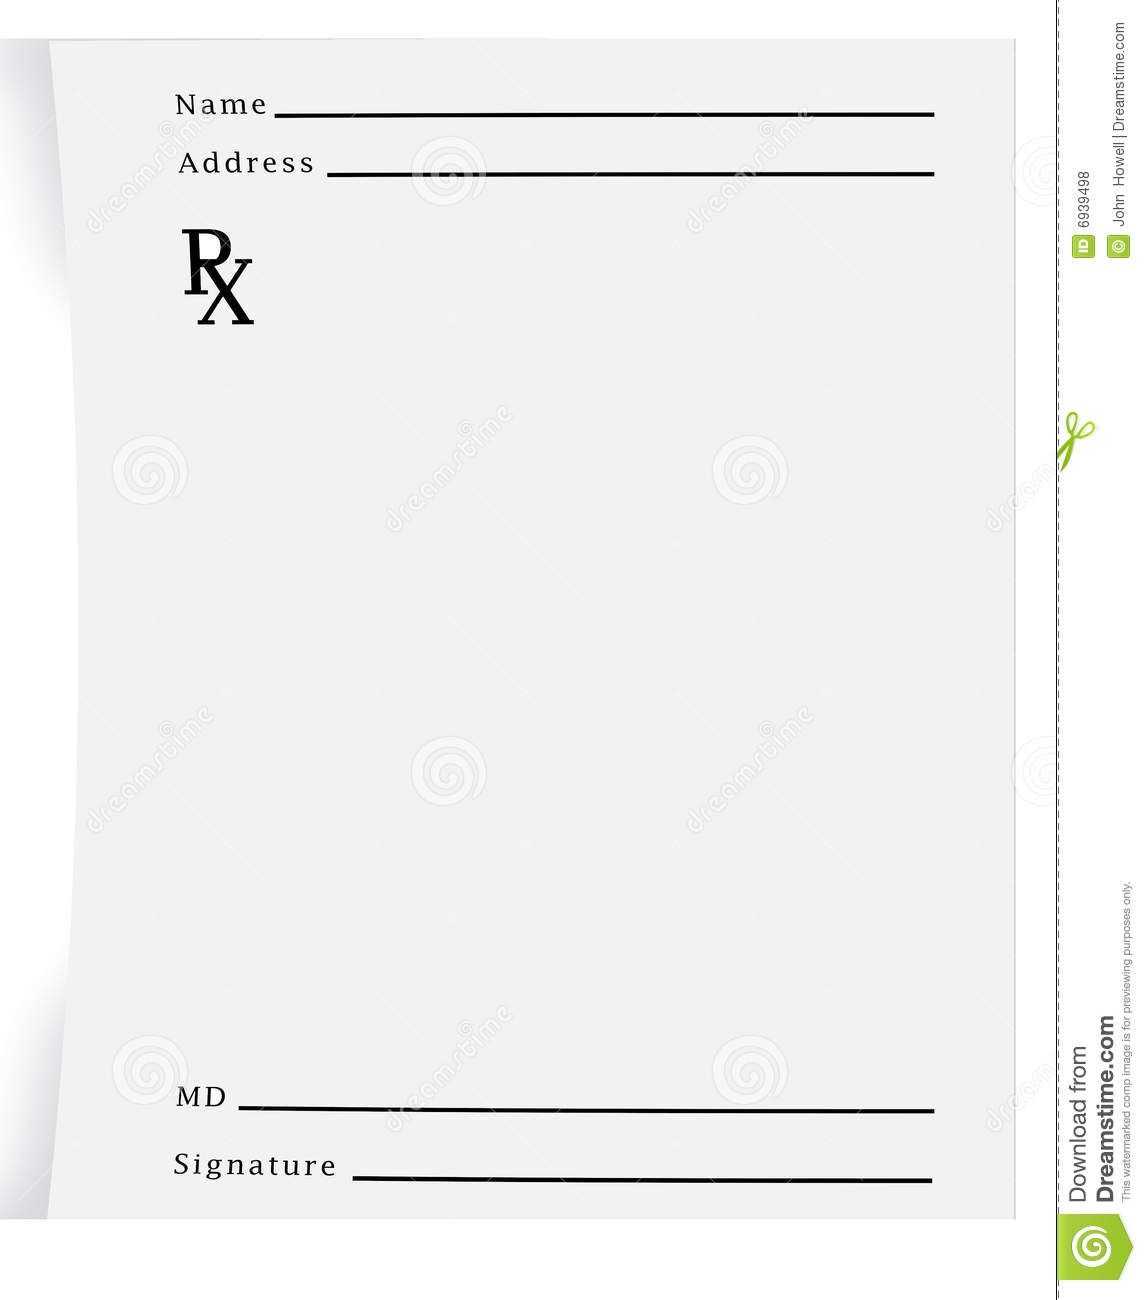 019 Template Ideas Prescription Pad Blank Download From Over Intended For Blank Prescription Form Template